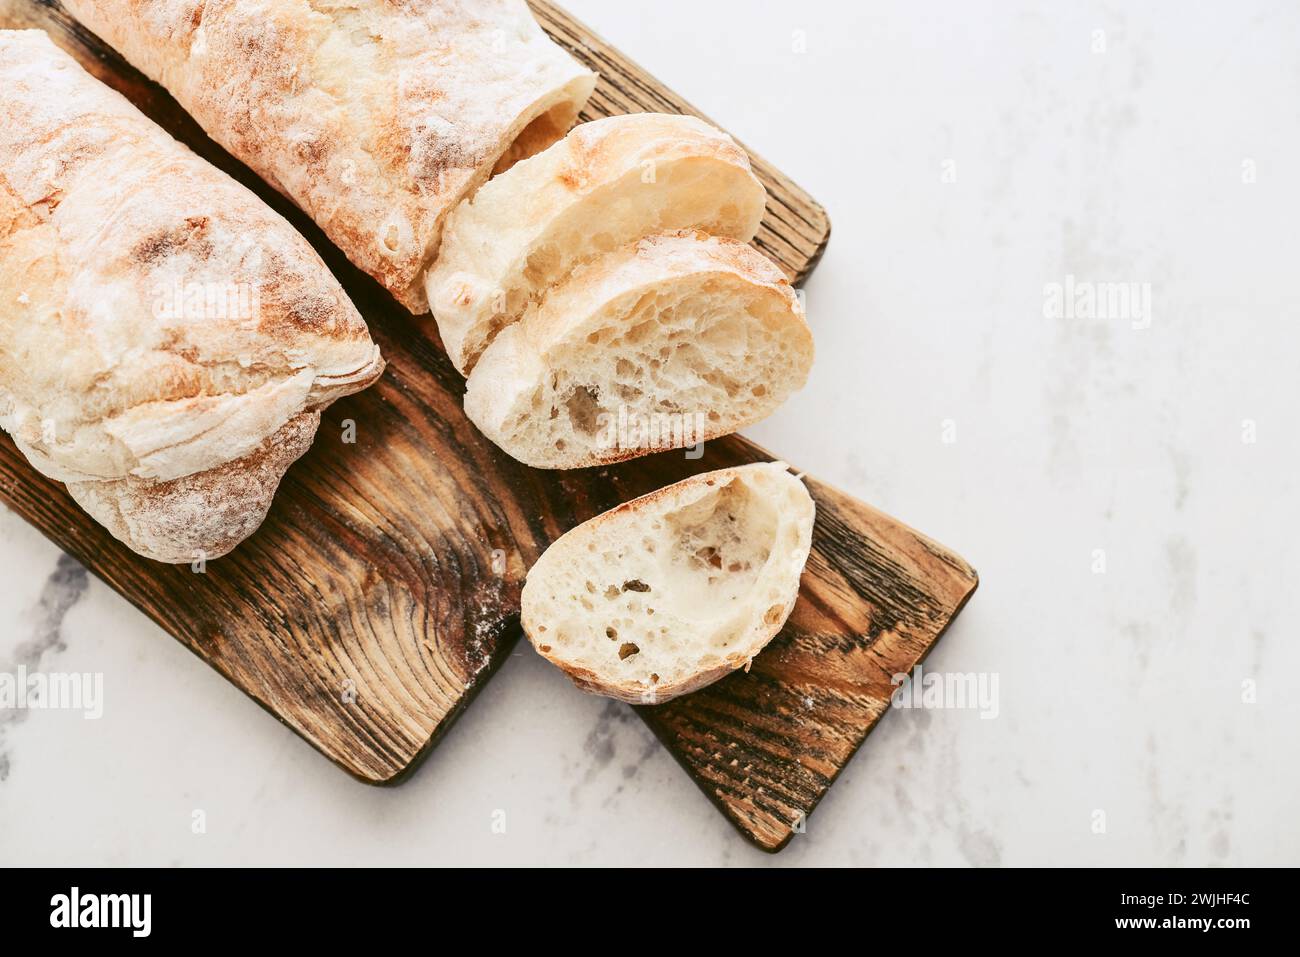 Rustic French sourdough baguettes on wooden cutting board, top view Stock Photo